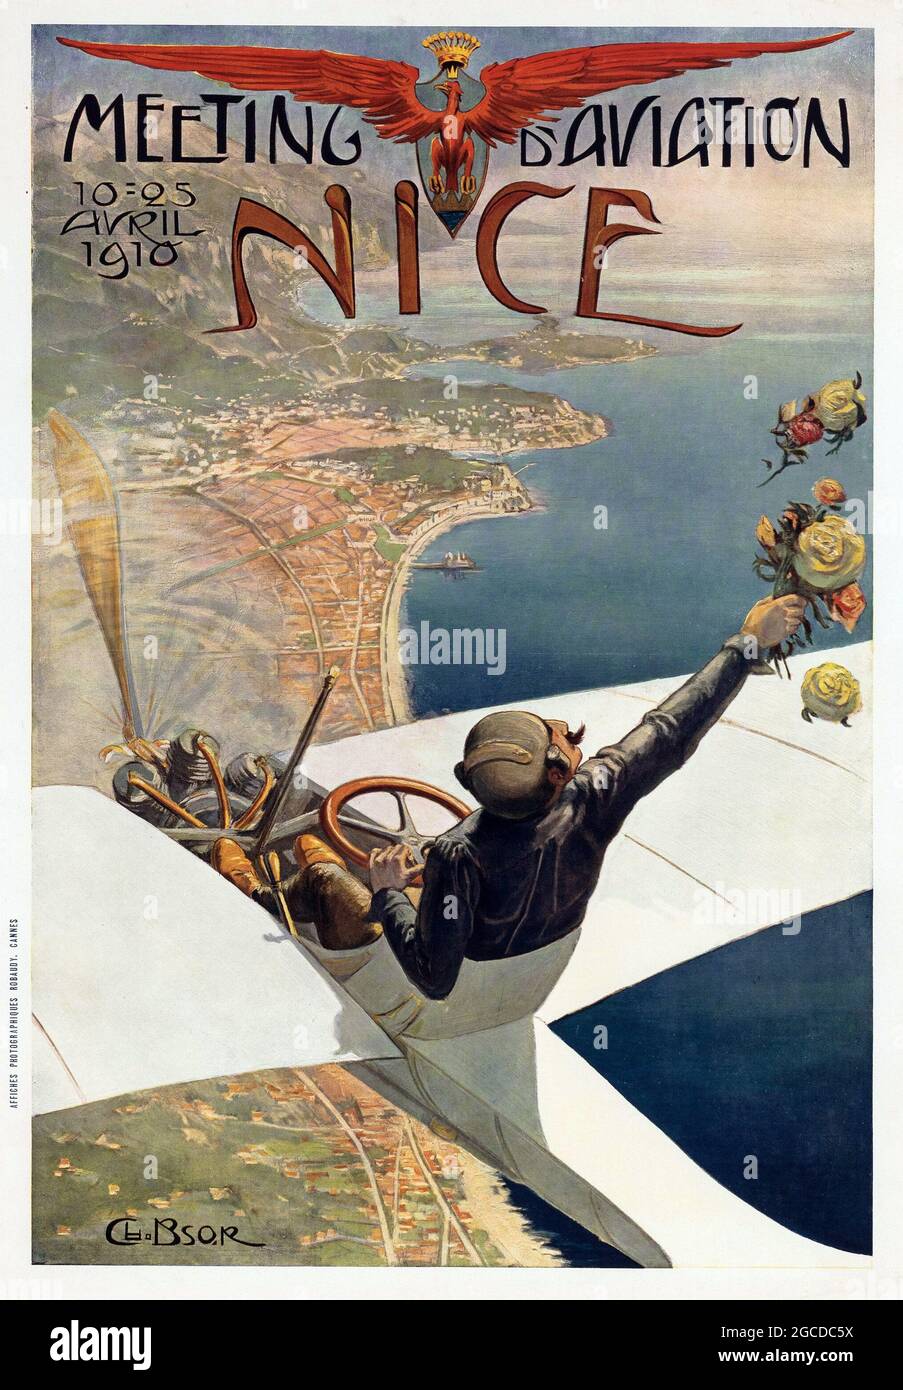 Vintage Aviation / Air / Flight poster. Artwork. 'Meeting d'Aviation Nice,' promoting an early 'aviation meeting' or air show. Stock Photo